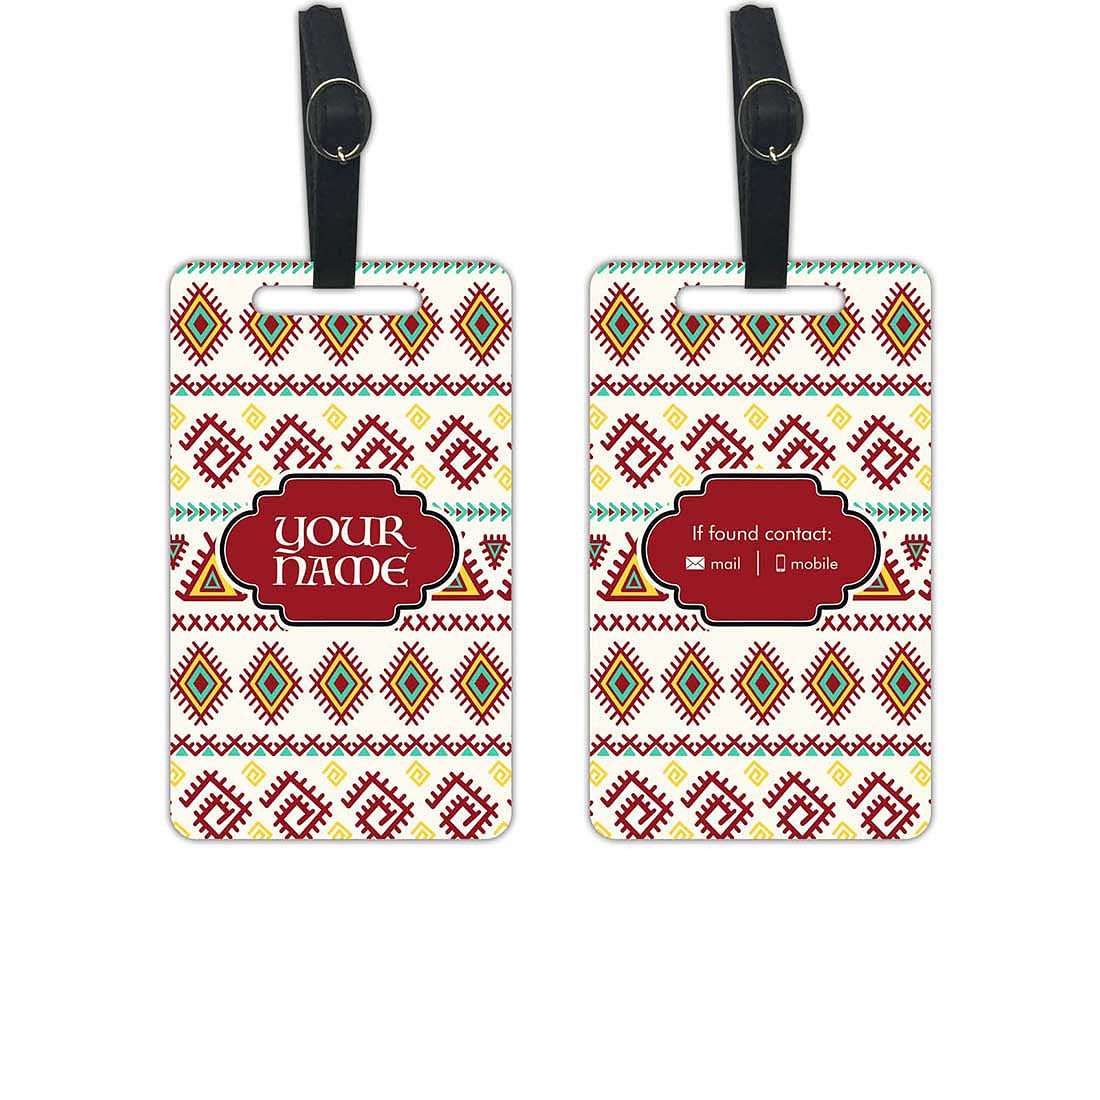 Customized Name Luggage Tag for Gift Add Your Name - Set of 2 Nutcase